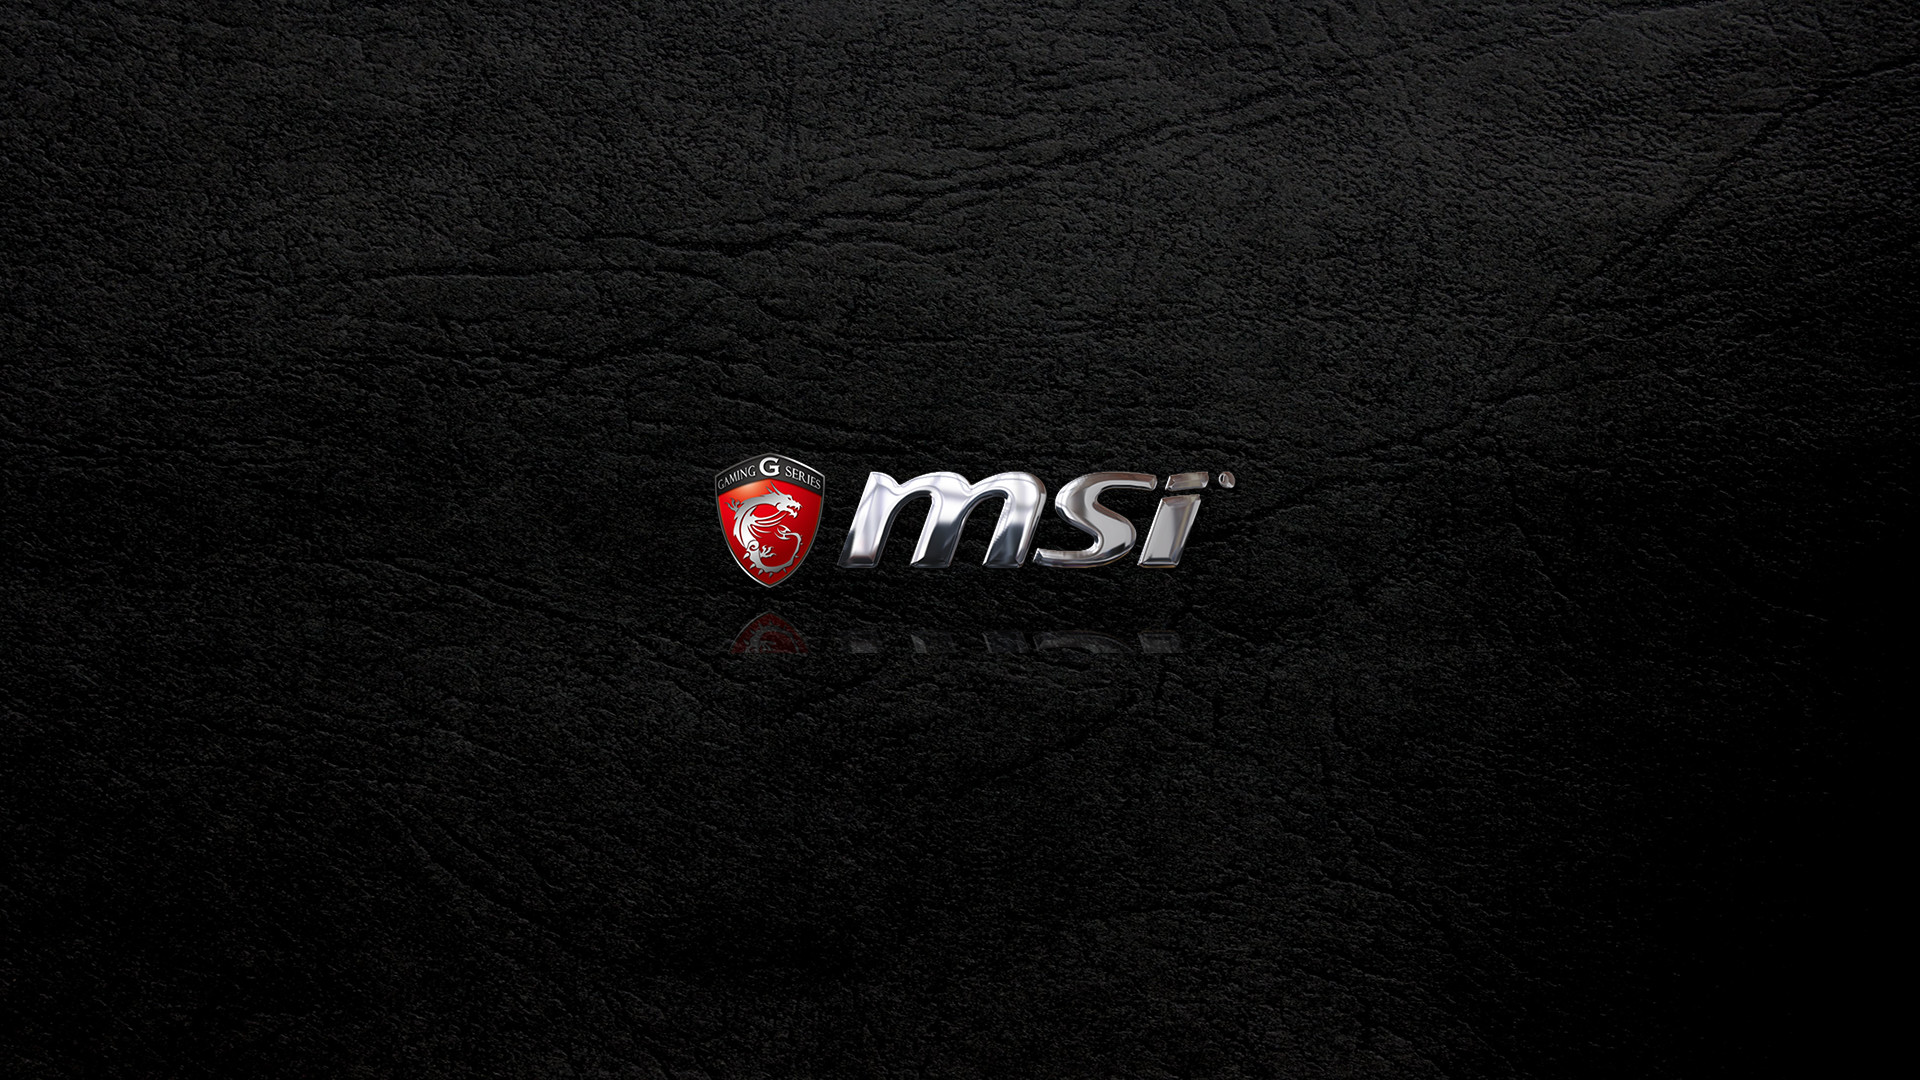 Thought I would share some wallpaper that I have created black leather msi.jpg  …